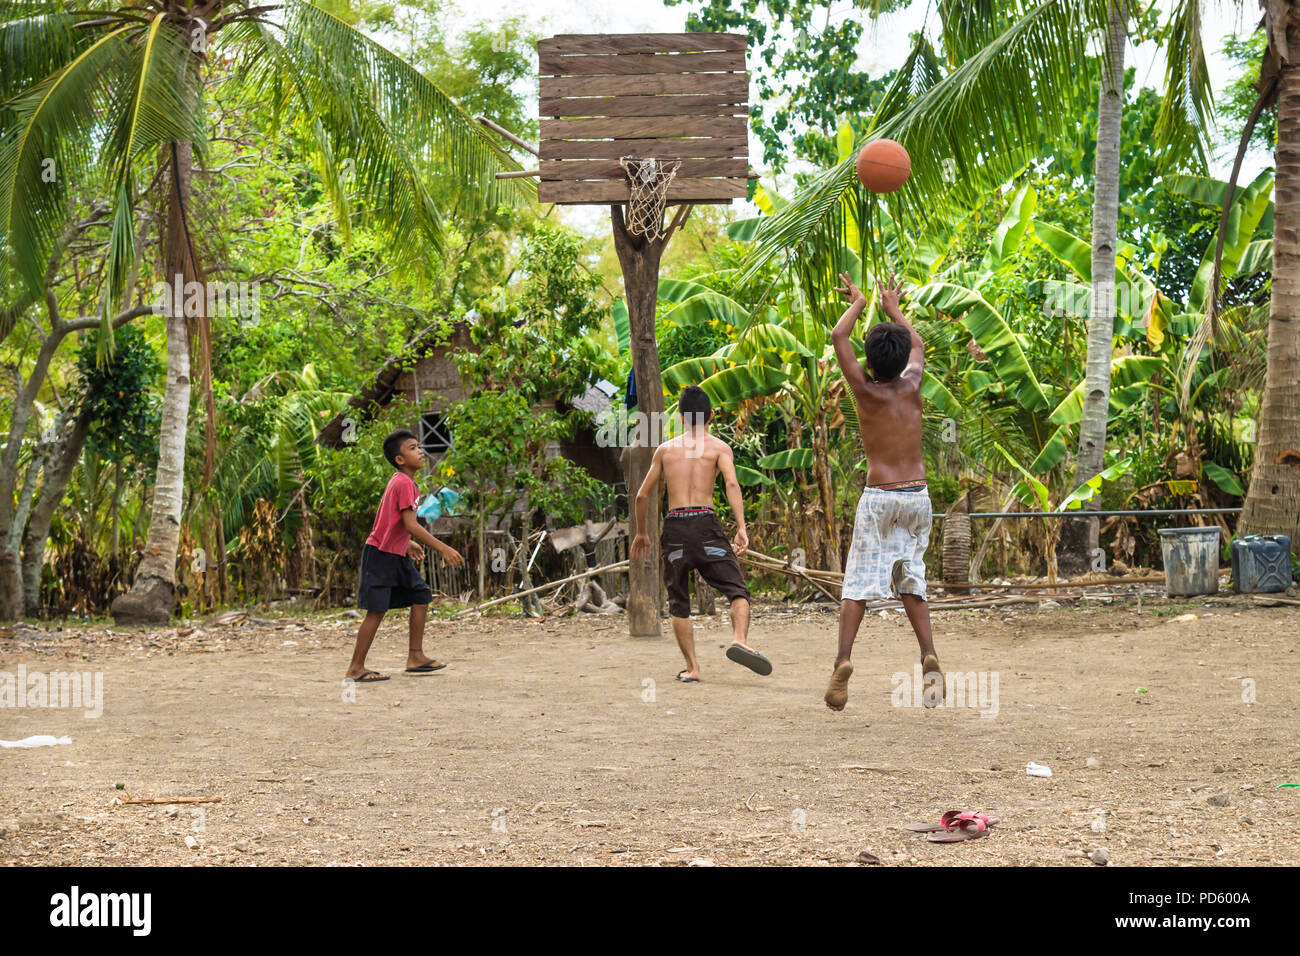 Sandugan, Siquijor, Philippines - May 13 2013: Three kids playing basketball with one kid jumping at sand field with old wooden basketball basket Stock Photo